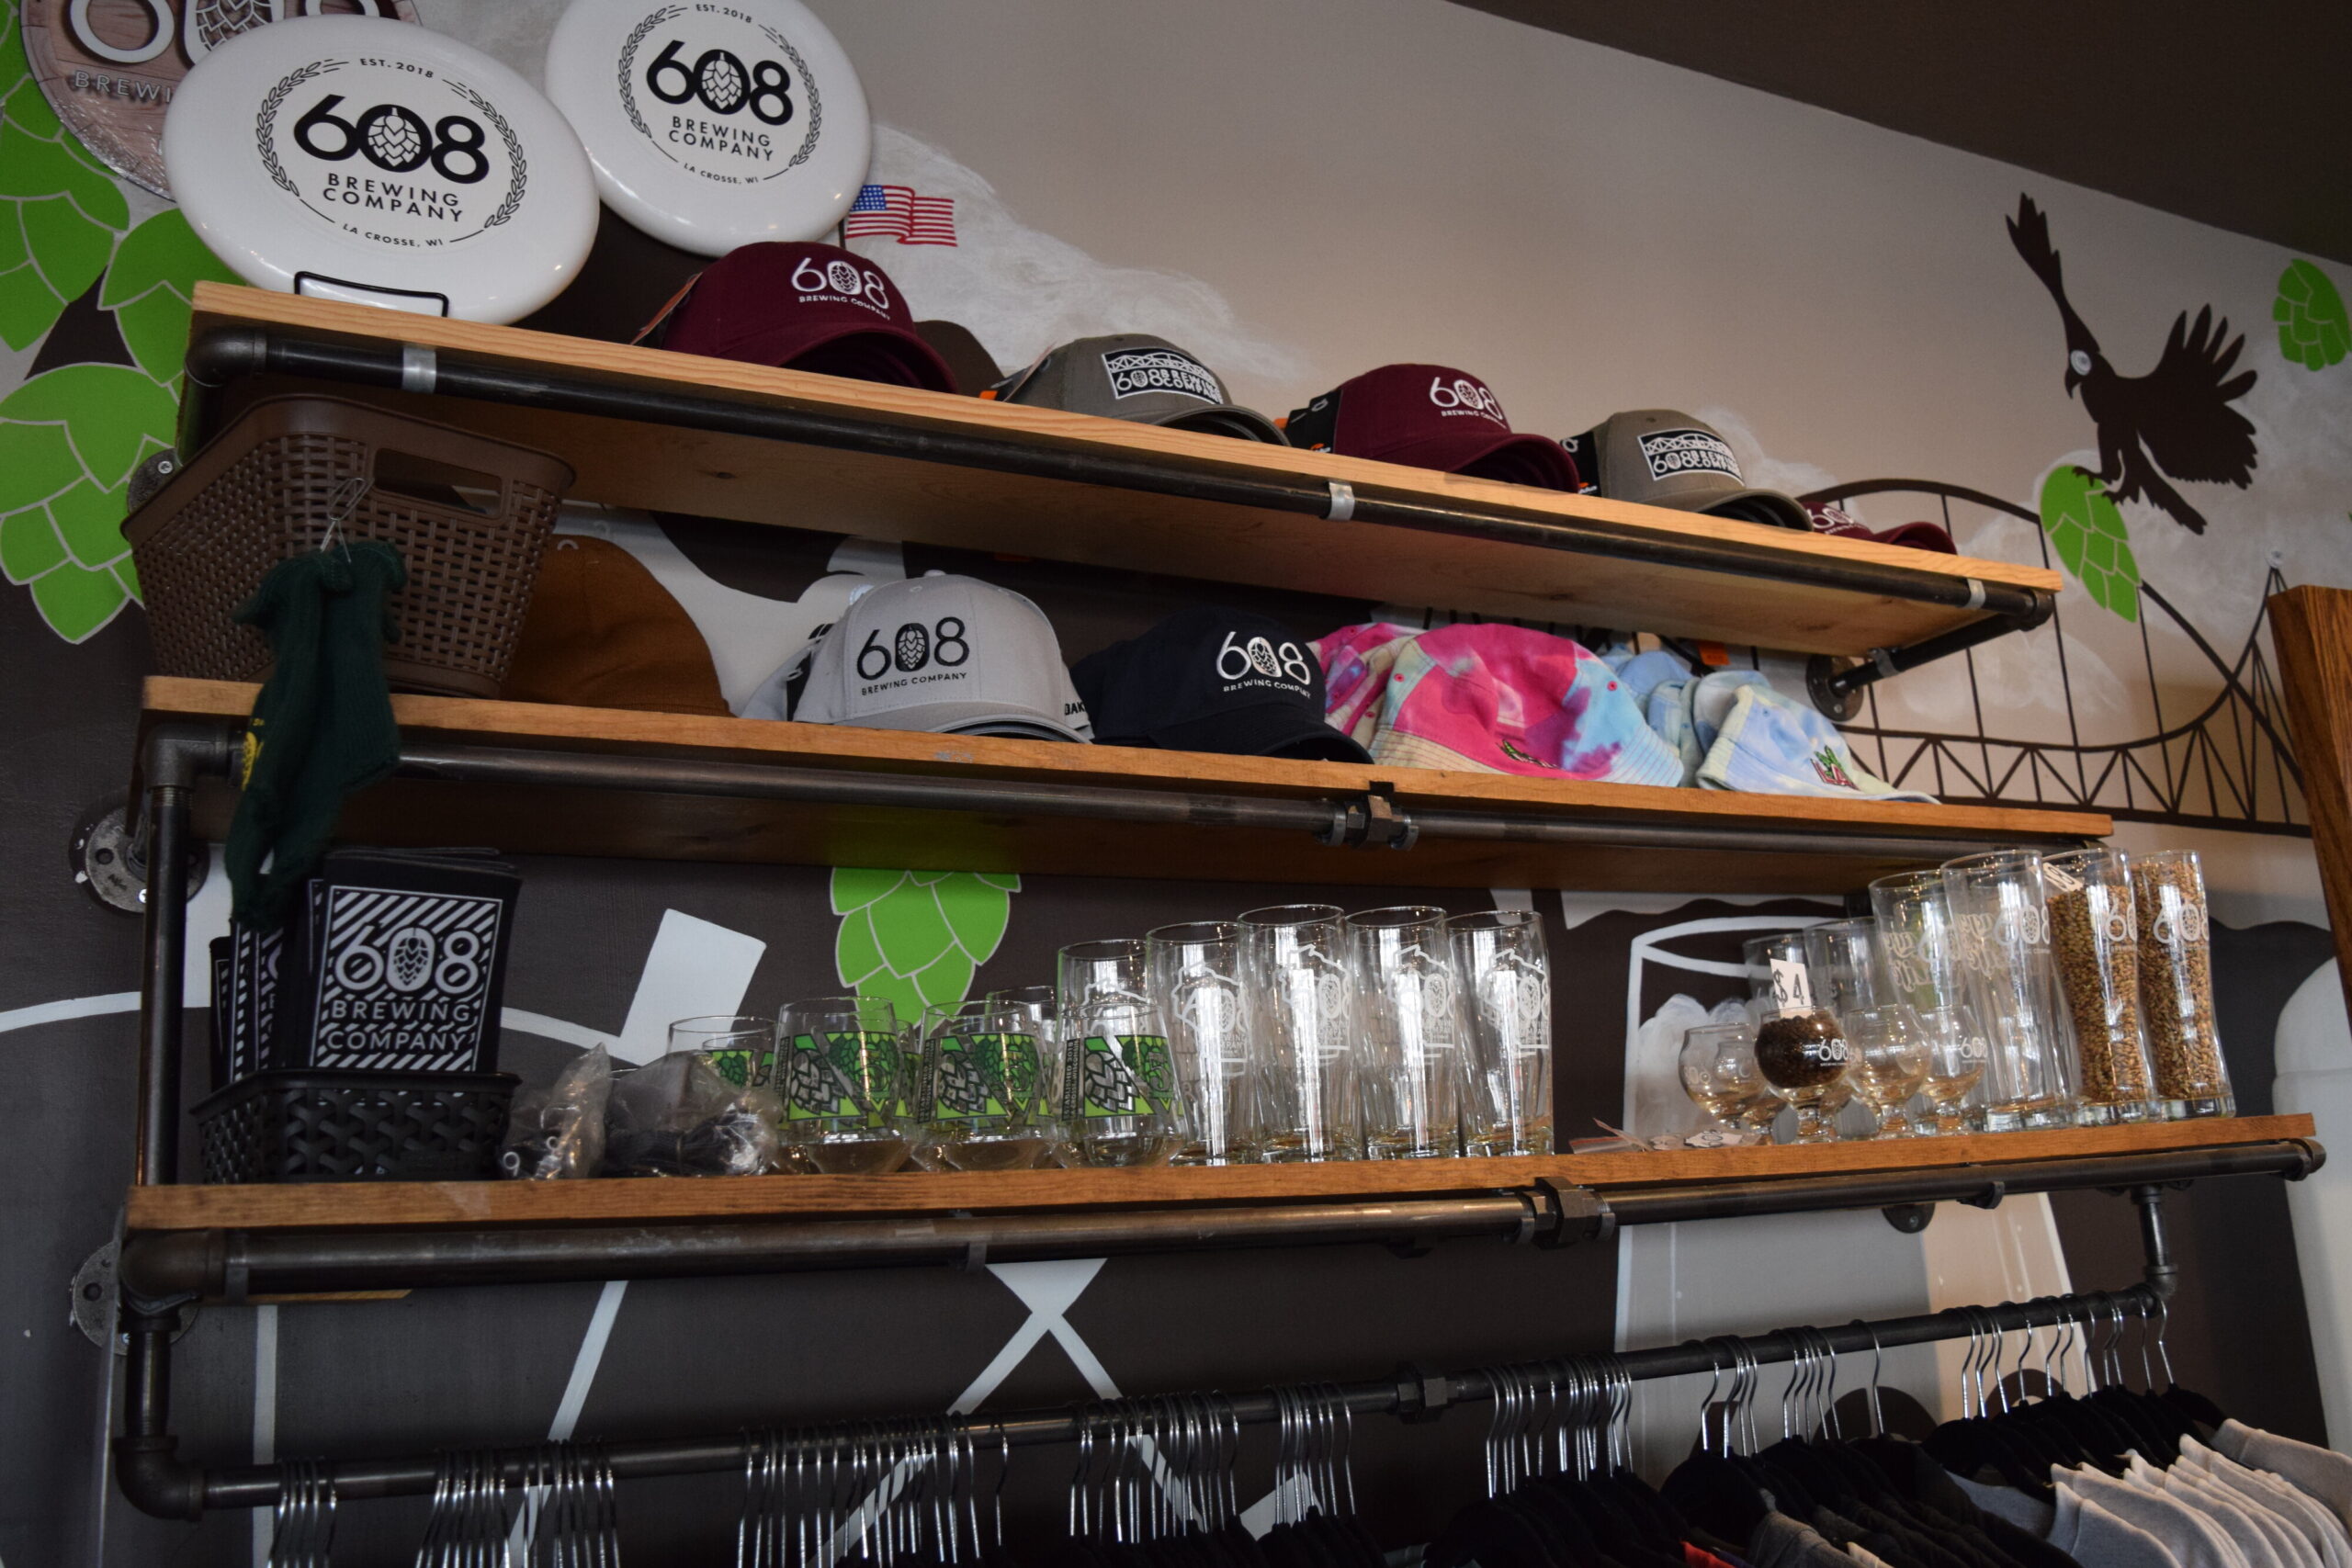 A shelf with baseball hats, beer glasses and koozies with the 608 Brewing Company logo